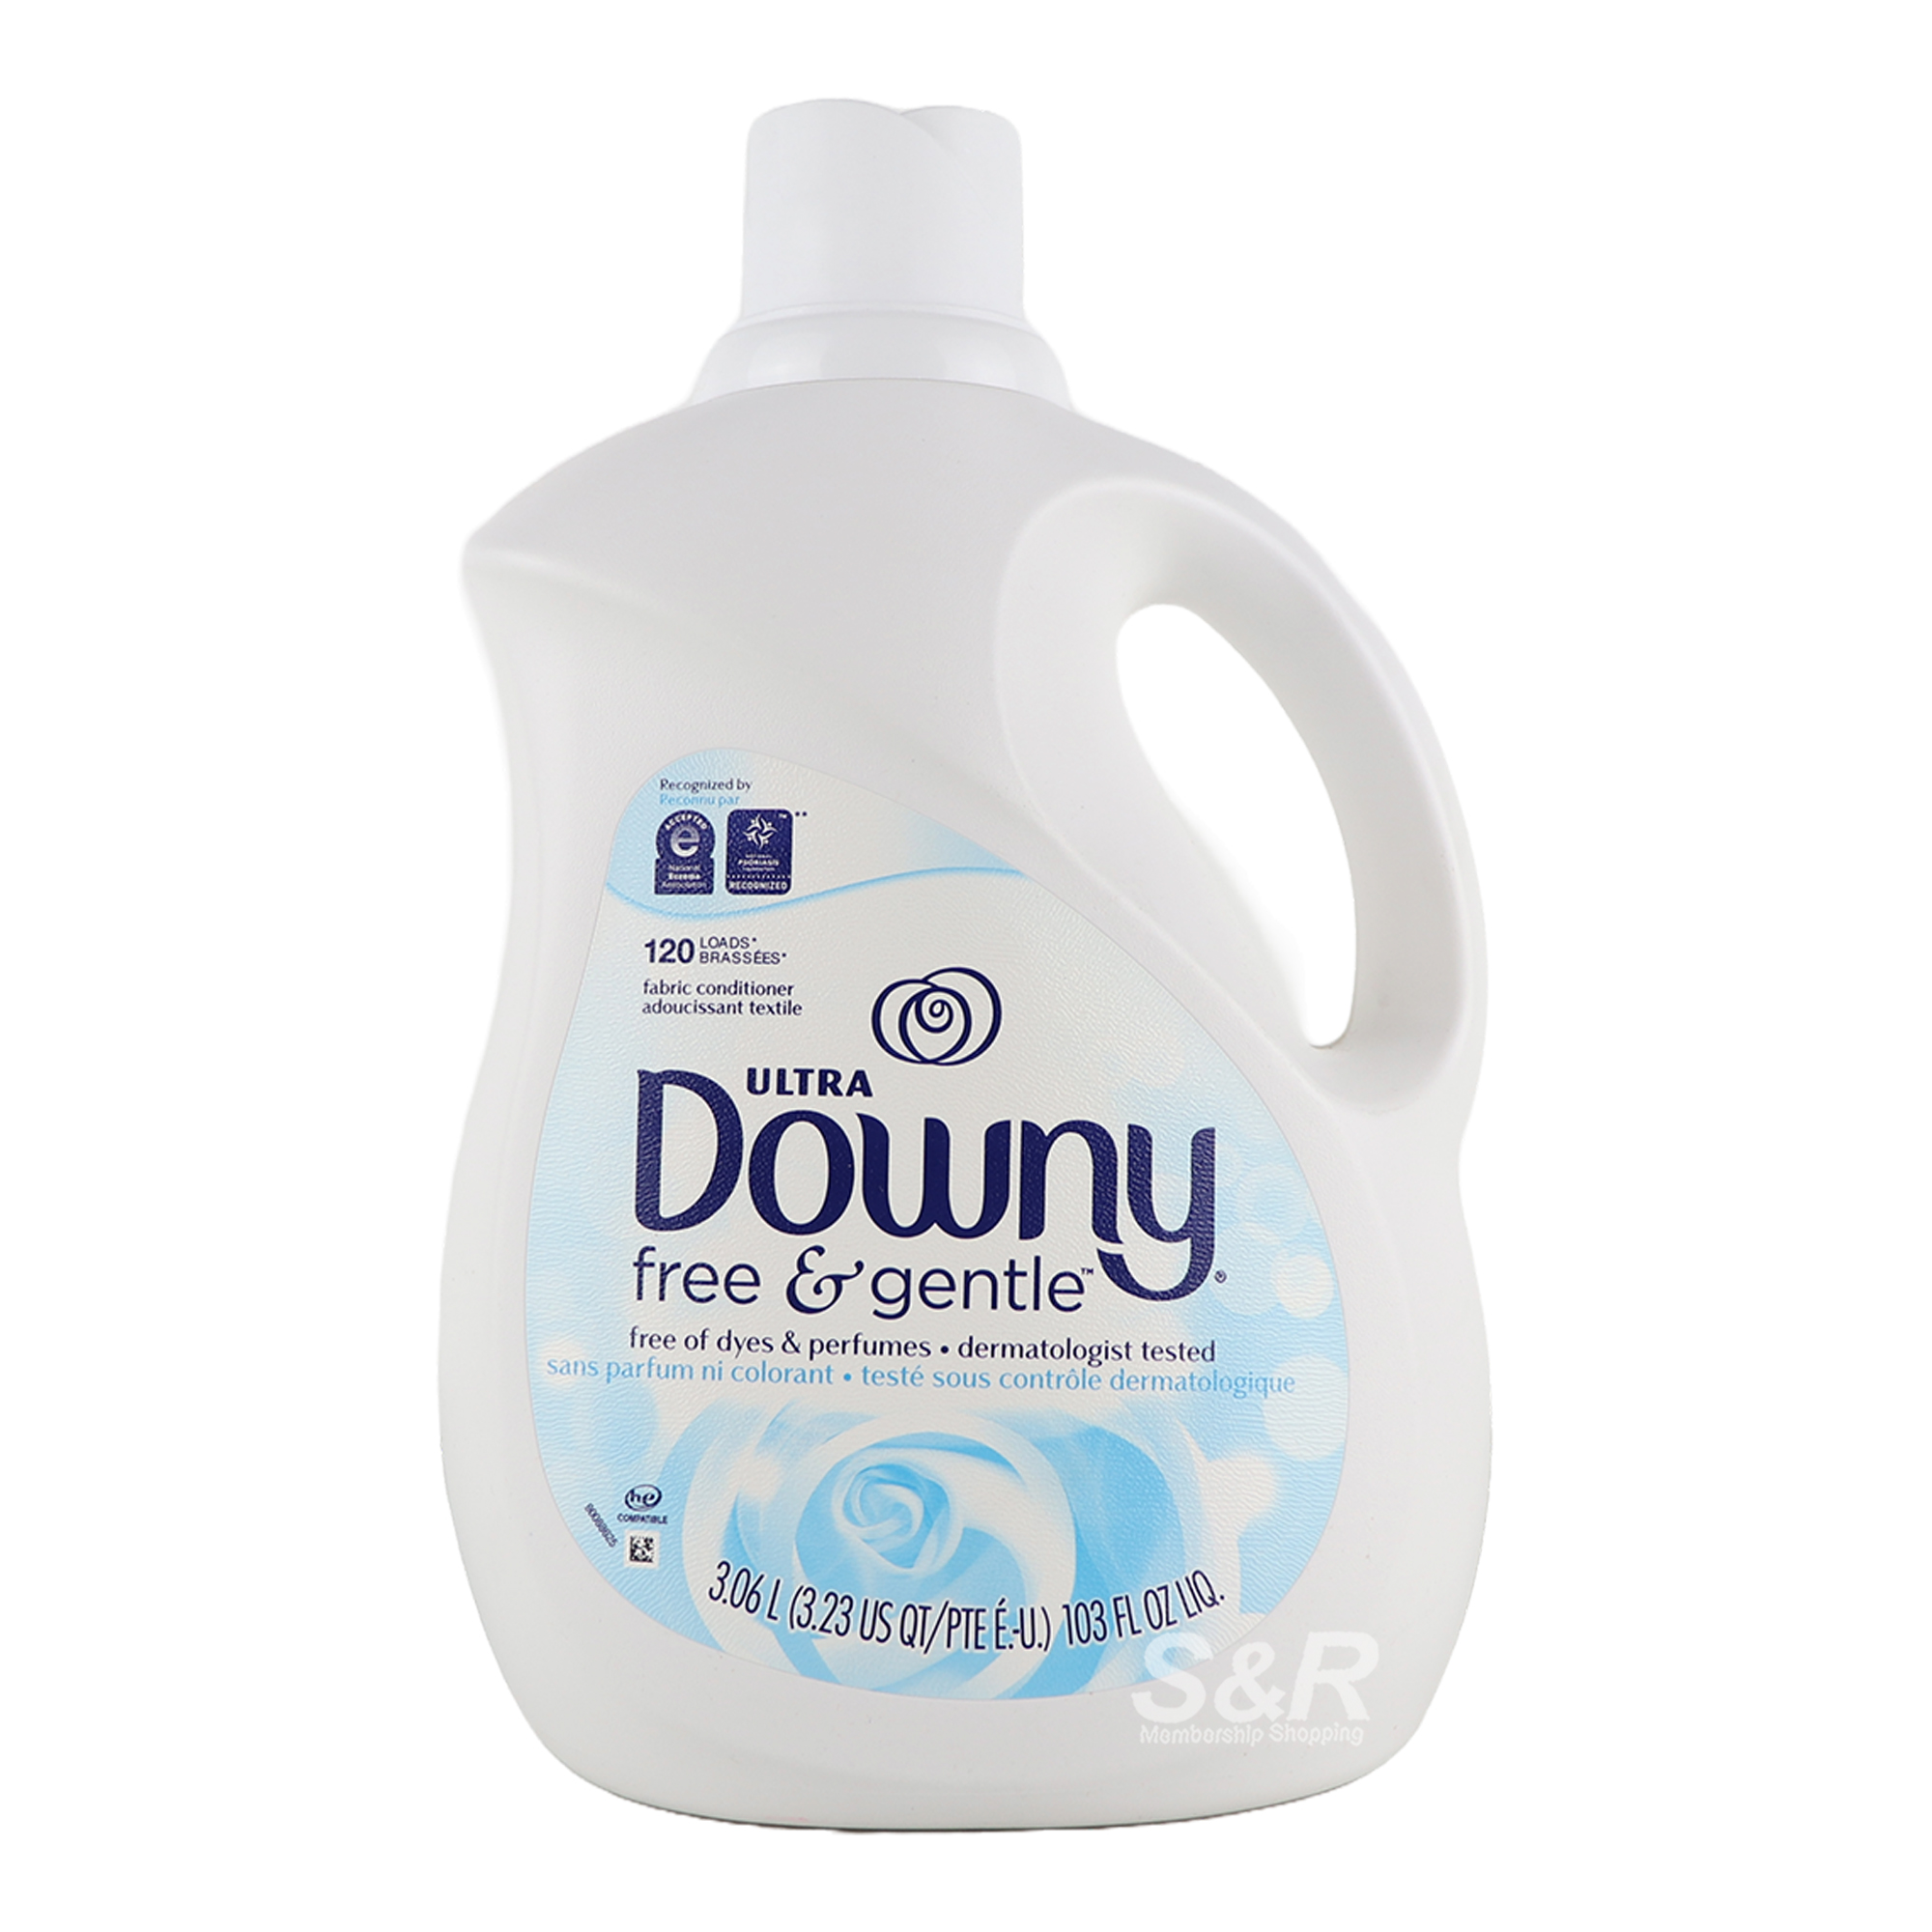 Downy Ultra Free and Gentle Liquid Fabric Conditioner 3.06L